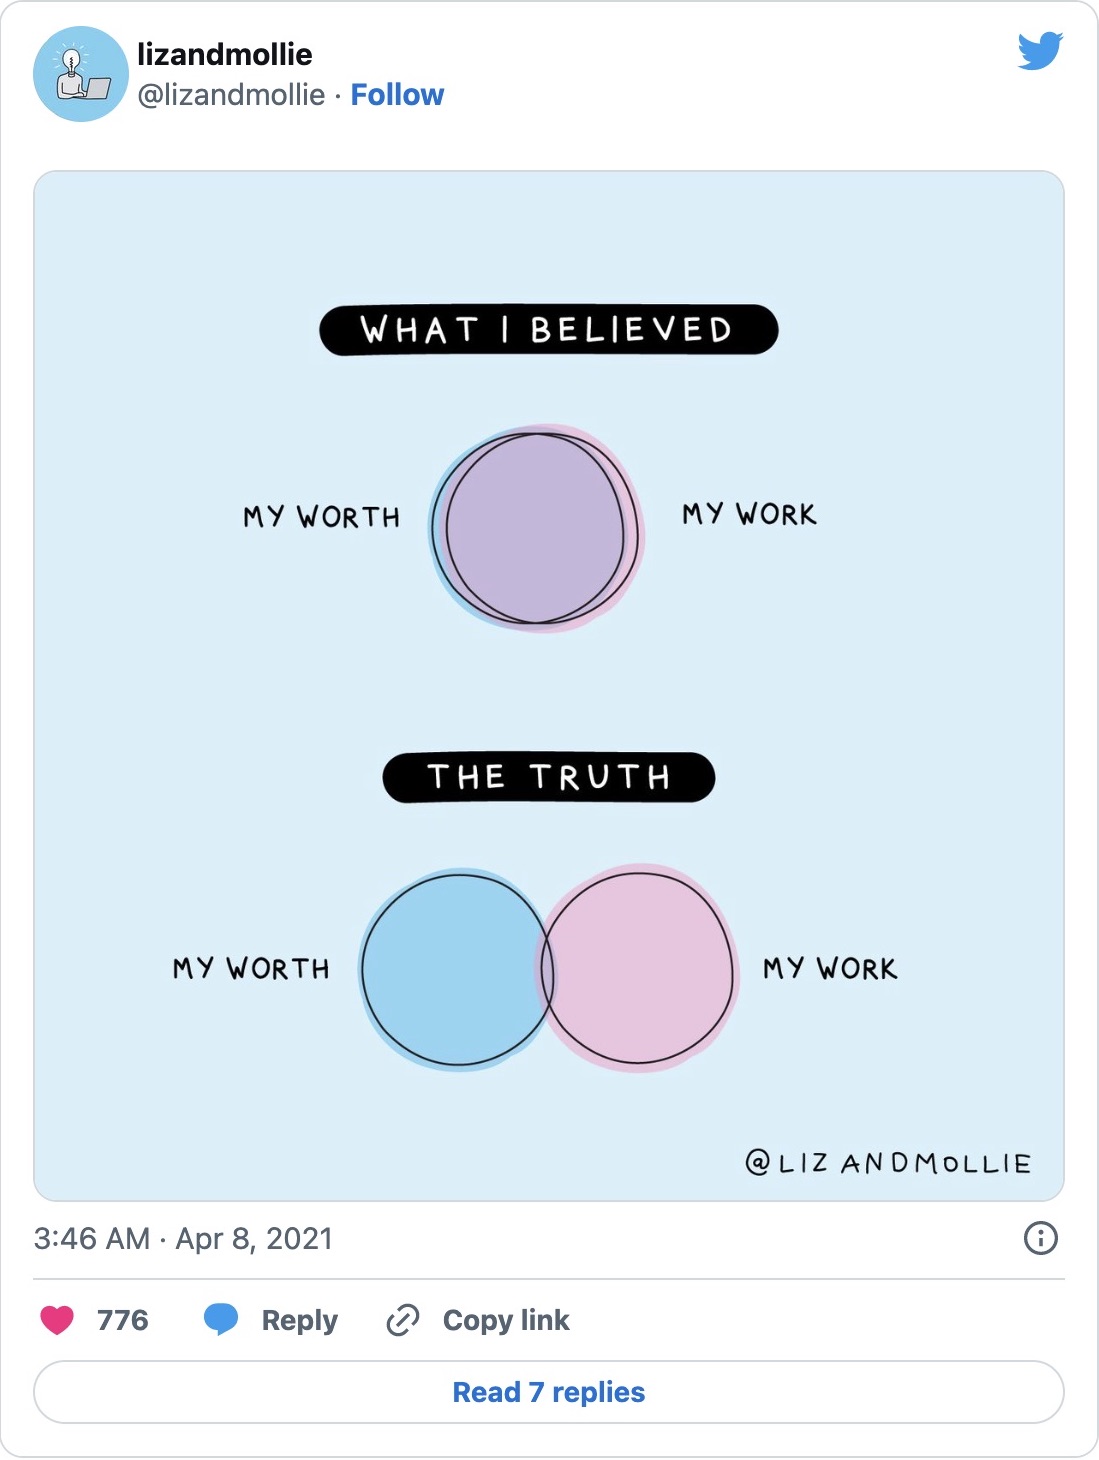 Tweet from lizandmollie: Two illustrated venn diagrams, the first titled 'What I believed' that shows two circles that are very overlapped, labeled 'My worth' and 'My work.' The second is titled, 'The truth' and shows two circles that are farther apart, also labeled, 'My worth' and 'My work.'